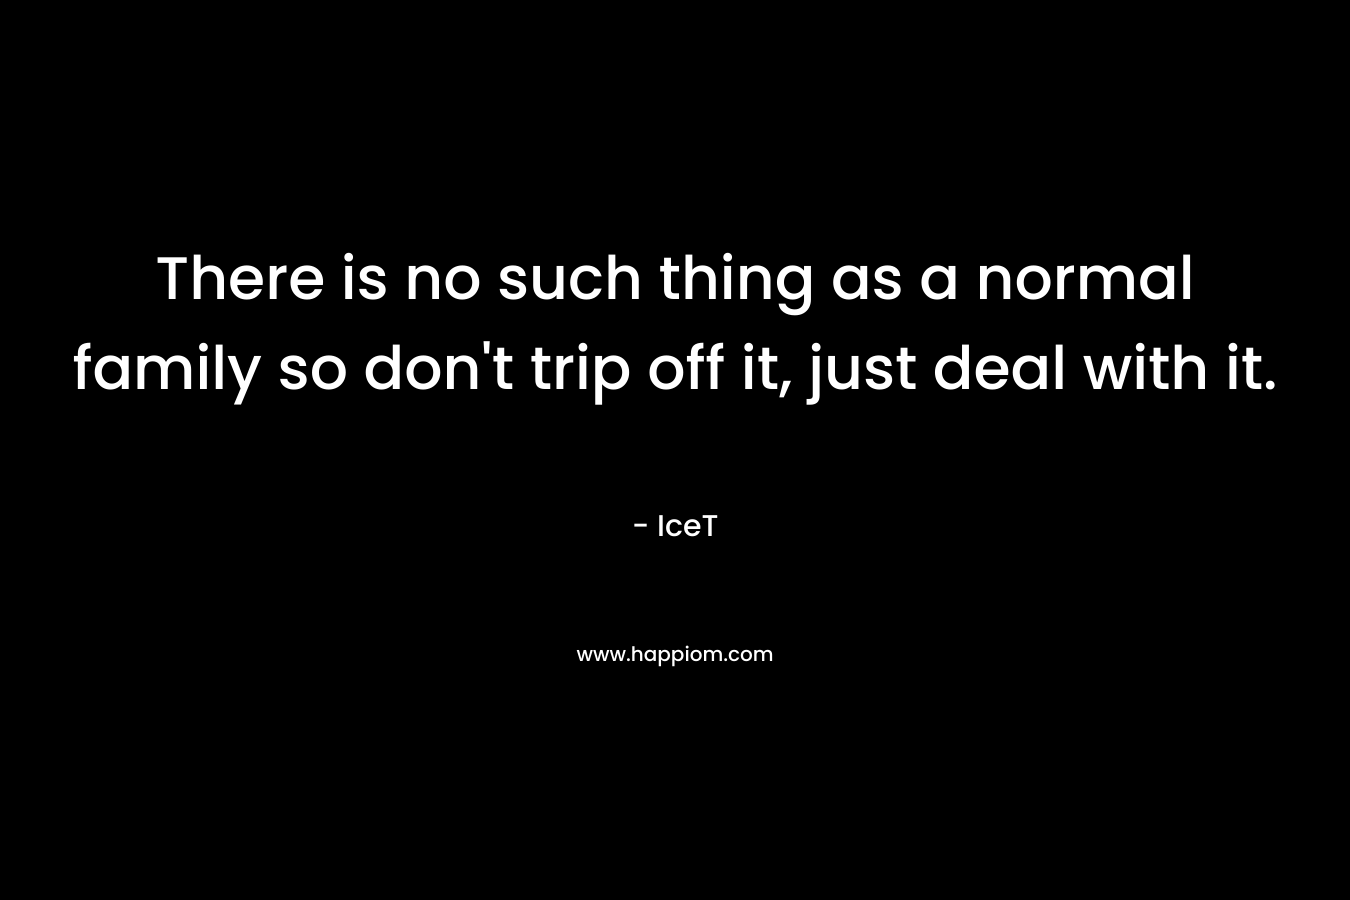 There is no such thing as a normal family so don't trip off it, just deal with it.